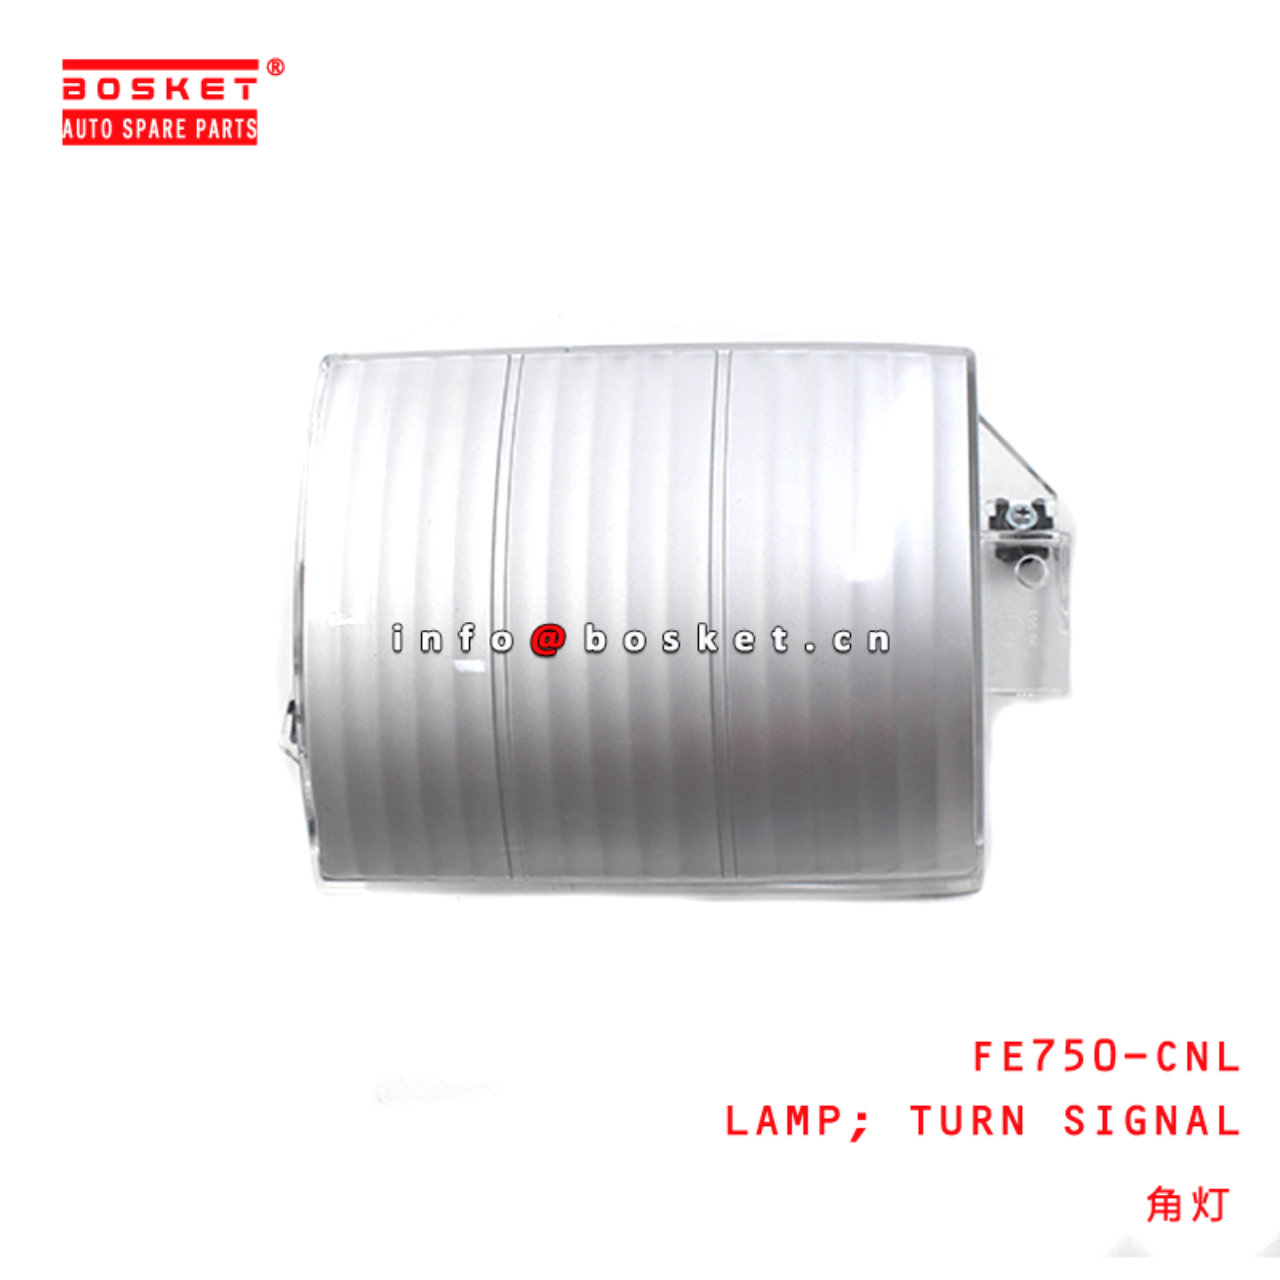 FE750-CNL Turn Signal Lamp Suitable For MITSUBISHI FUSO CANTER FE750